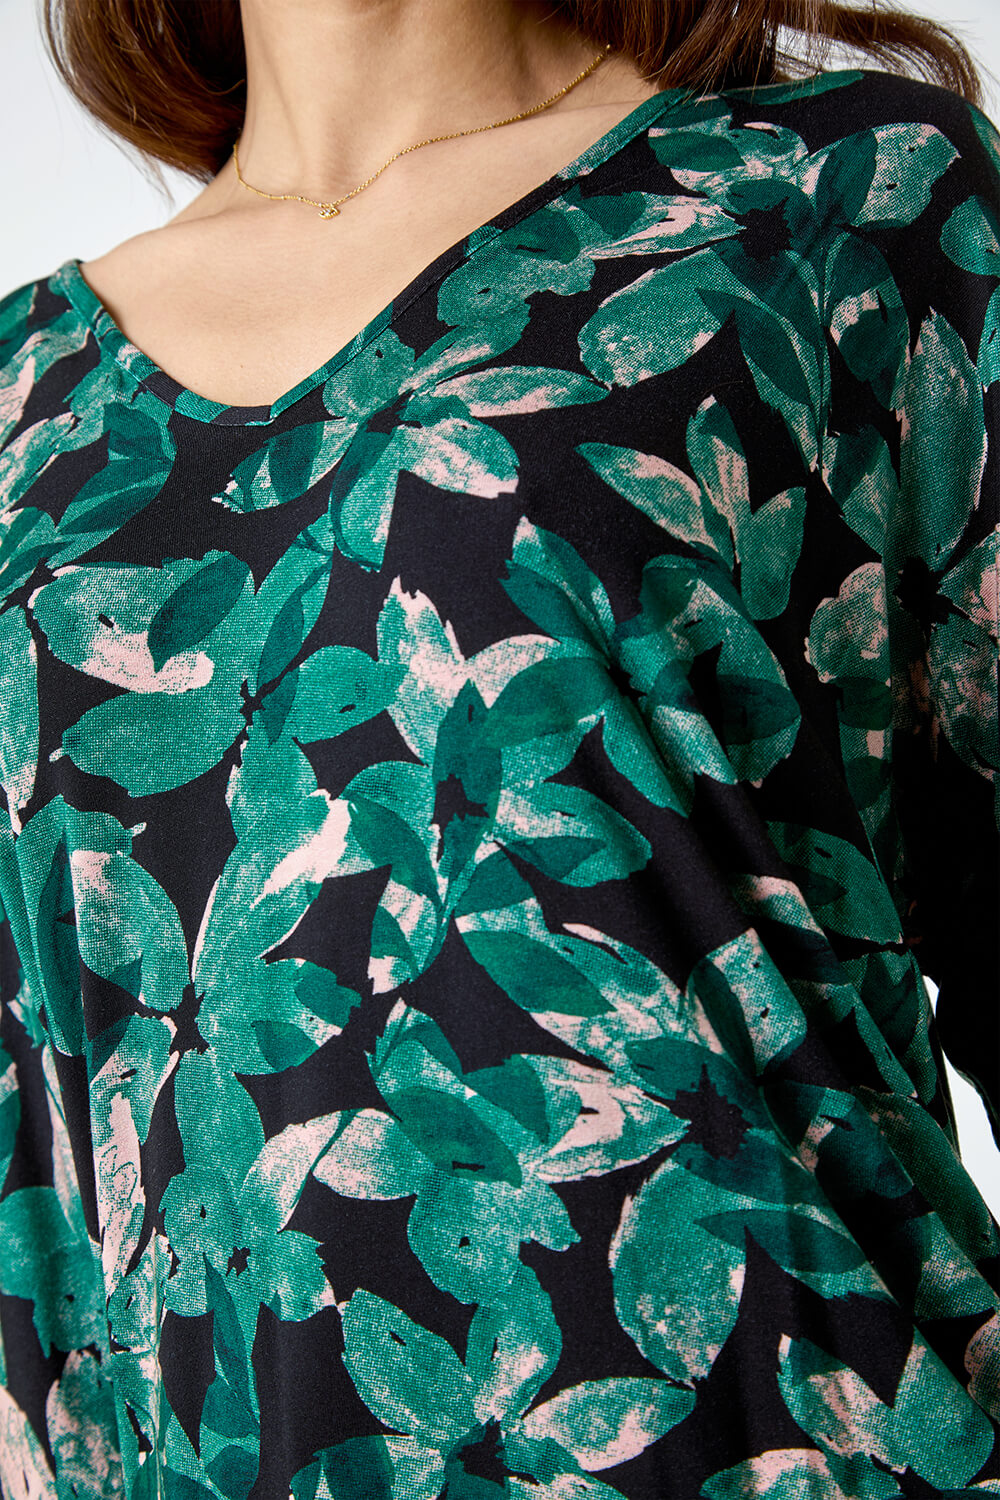 Green Floral Print Blouson Stretch Top, Image 5 of 5